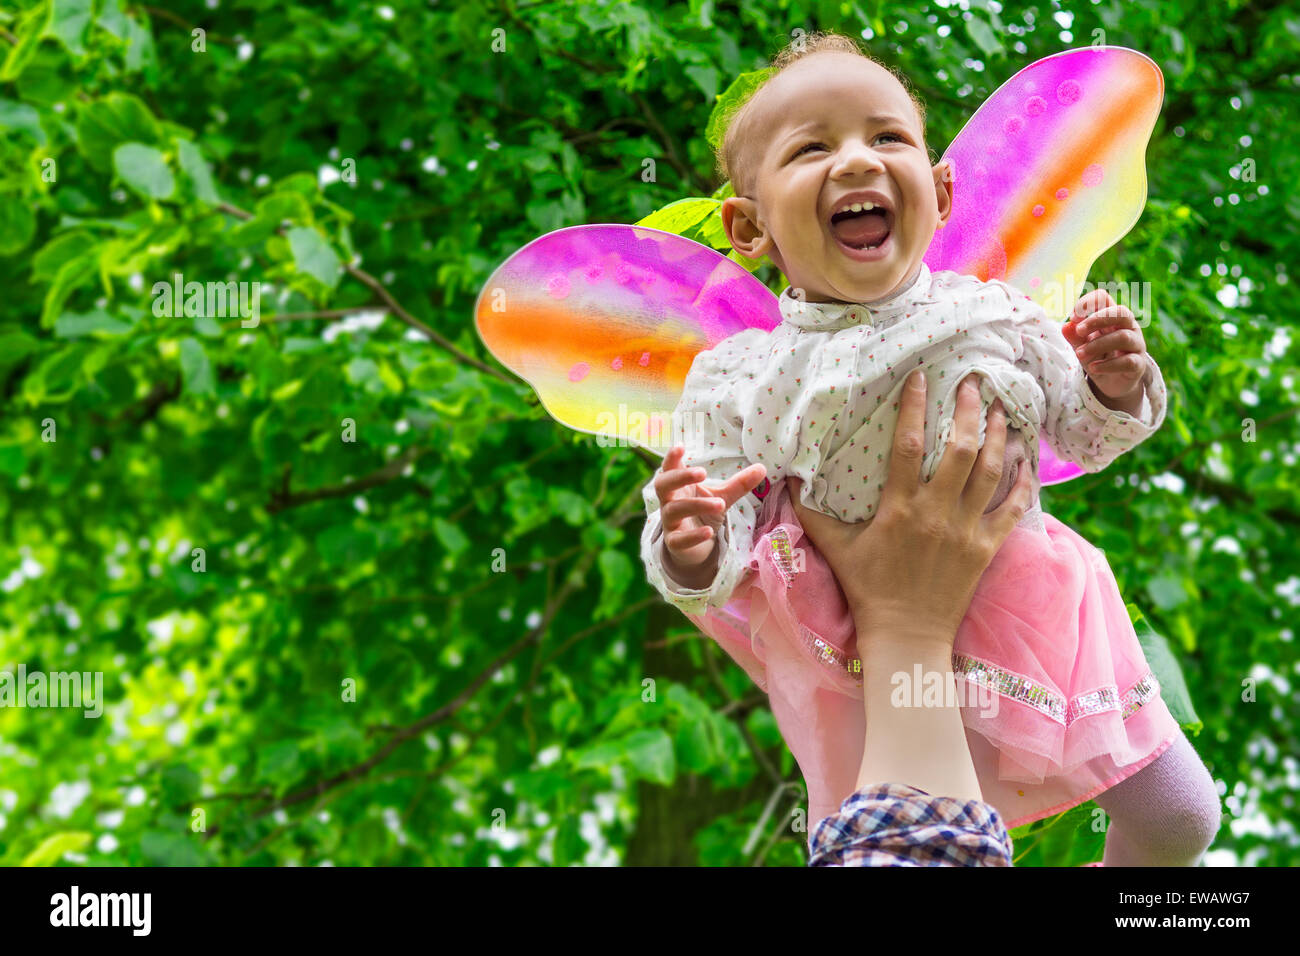 Adorable baby girl with butterfly wings Stock Photo